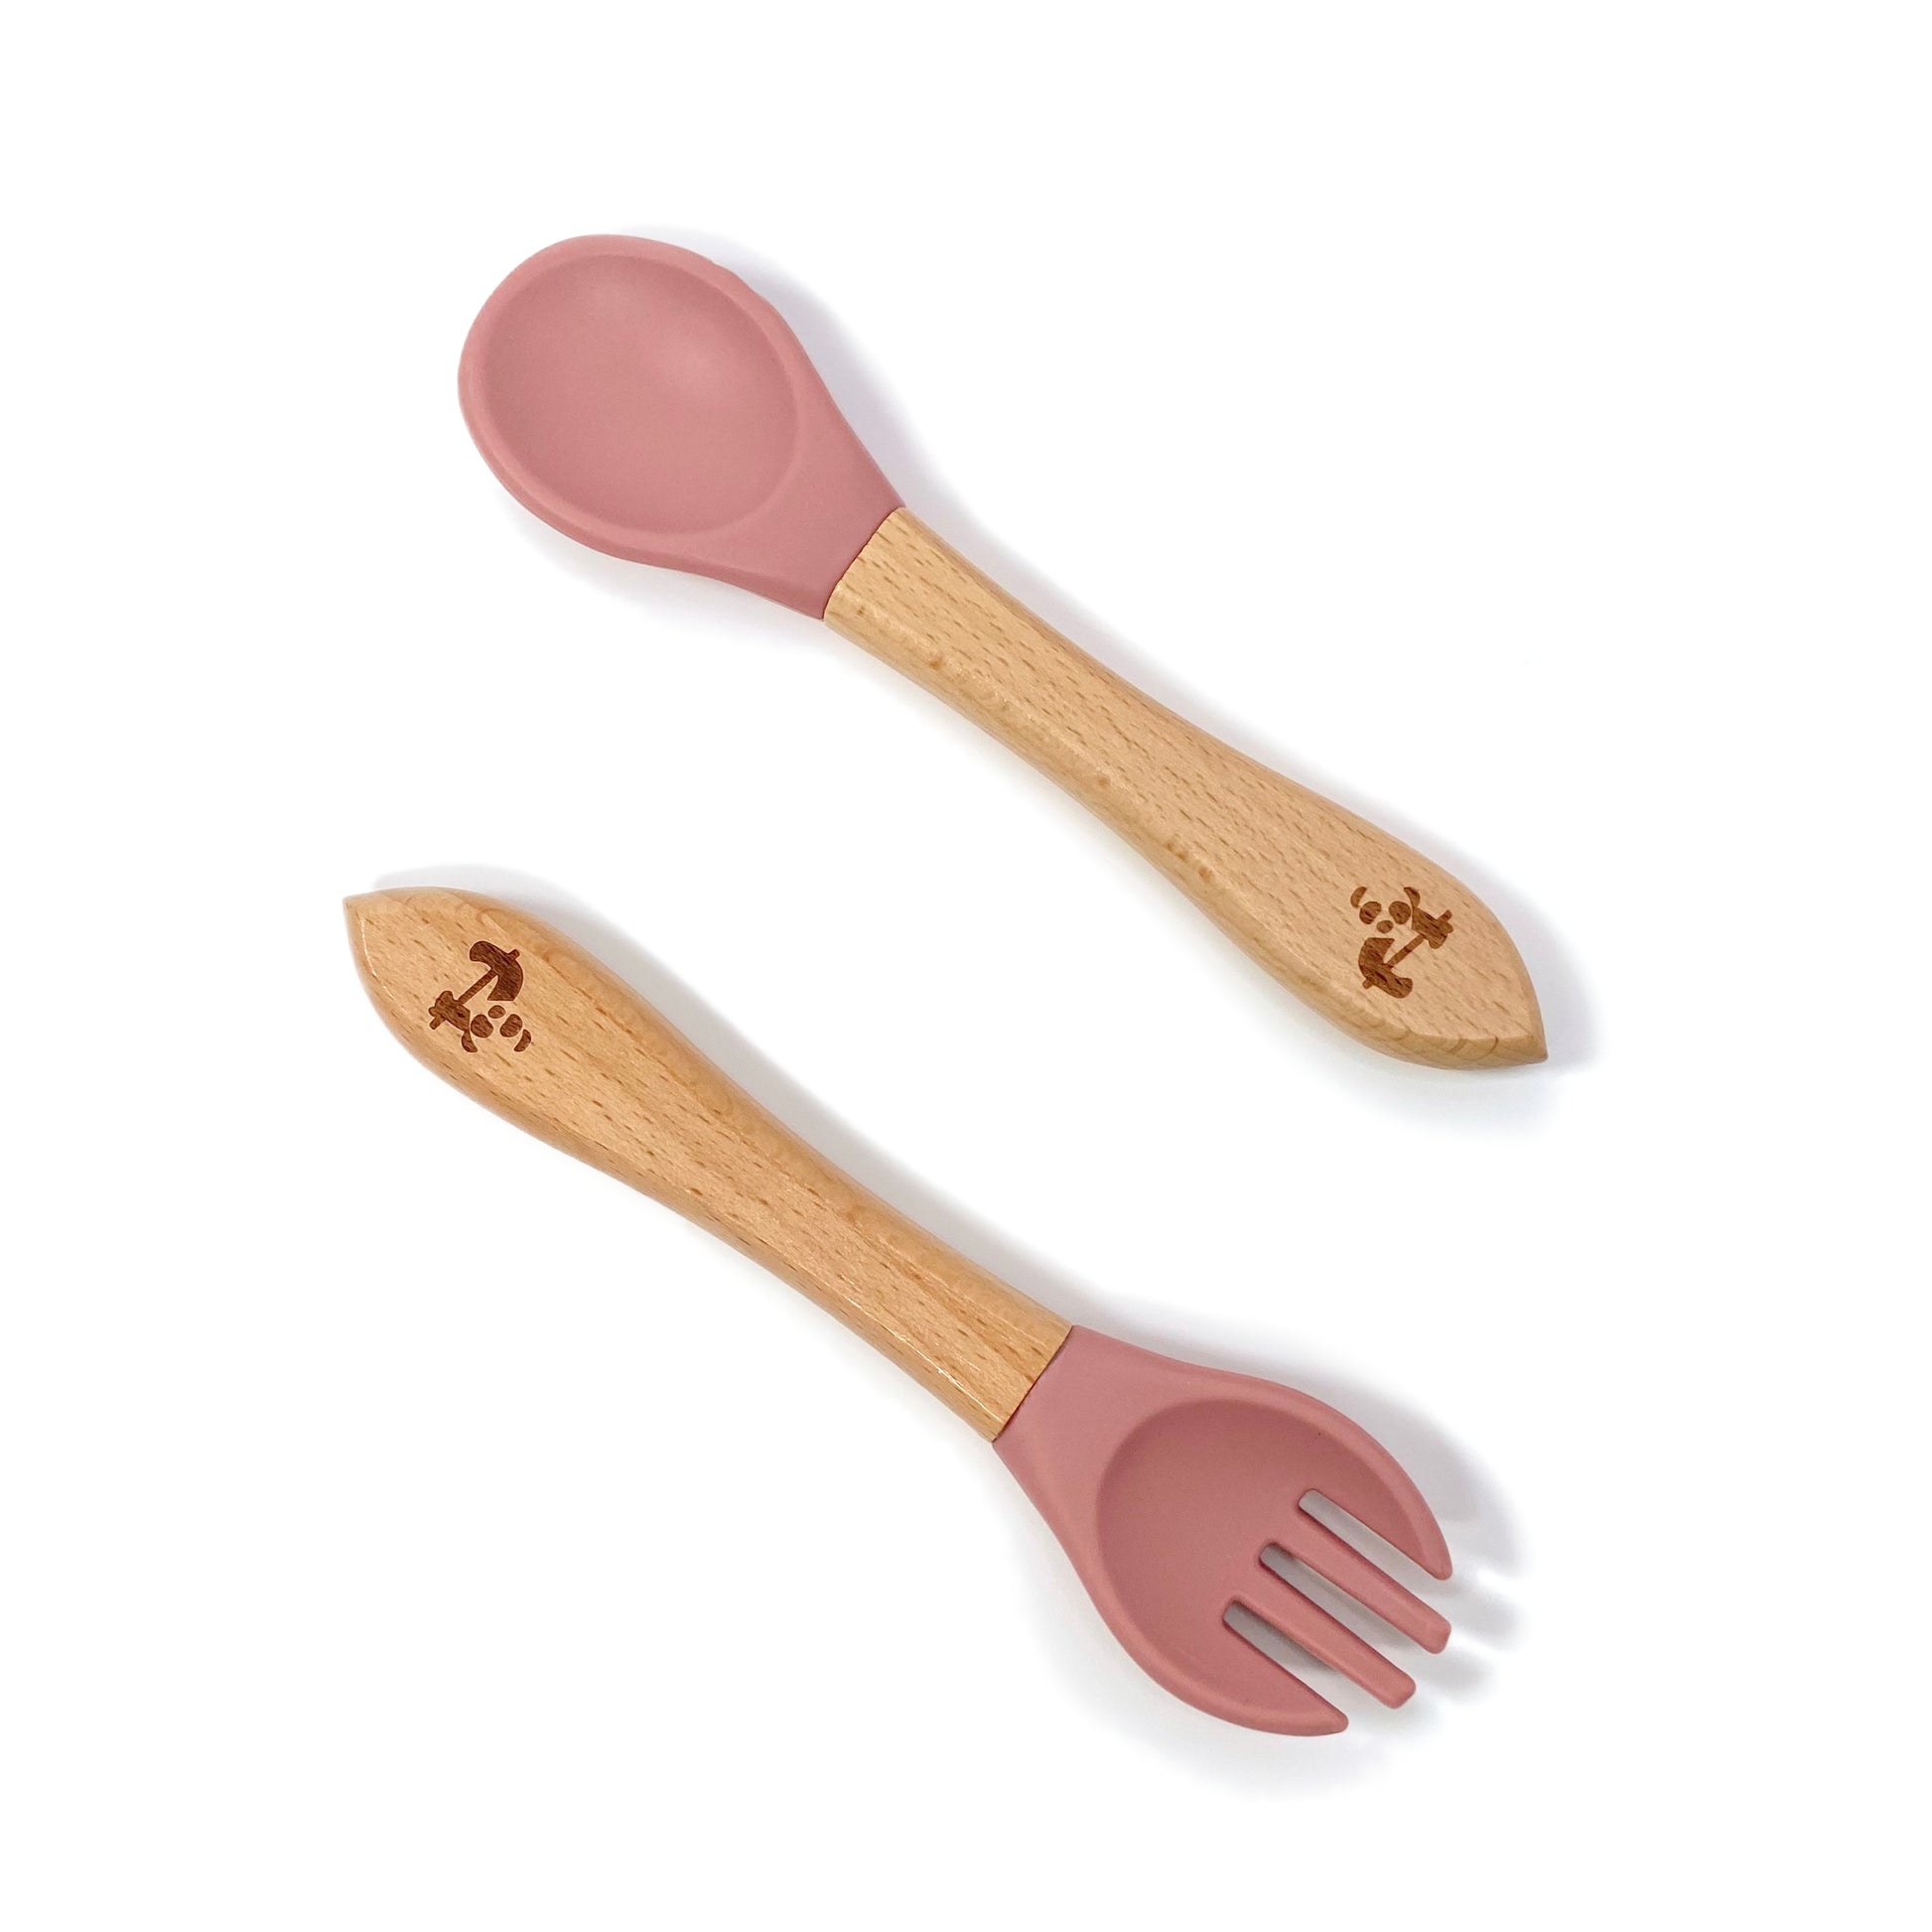 A set of children’s bamboo and silicone cutlery, in blush pink colour.